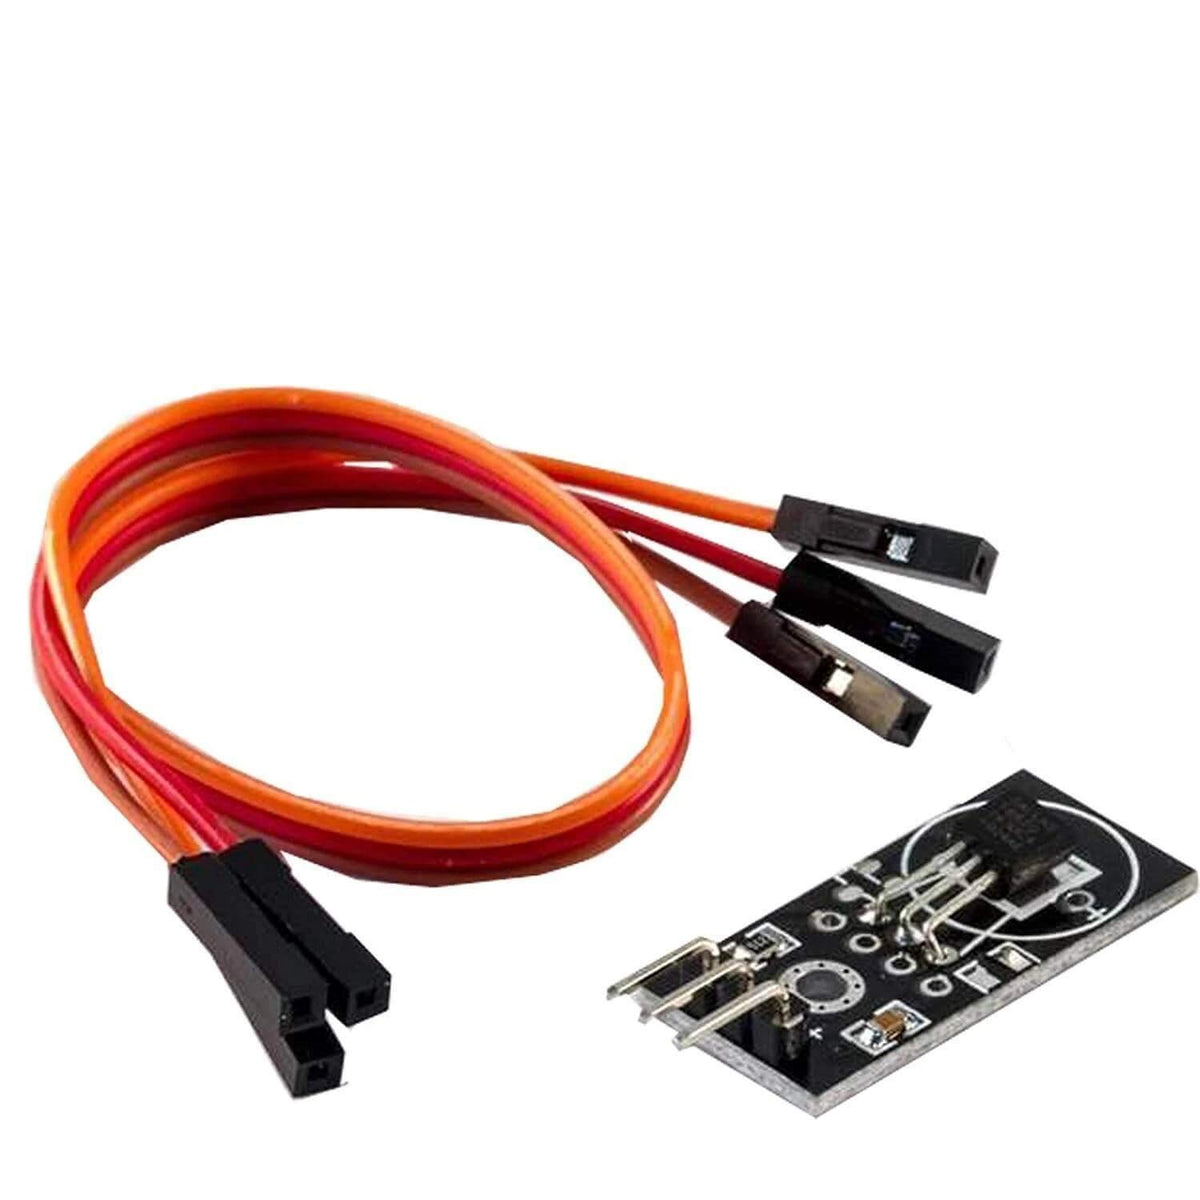 AZDelivery KY-001 DS18B20 3 Pin Waterproof Stainless Steel Digital Temperature Sensor Module 3V 5.5V Compatible with Arduino and Raspberry Pi Including E-Book!